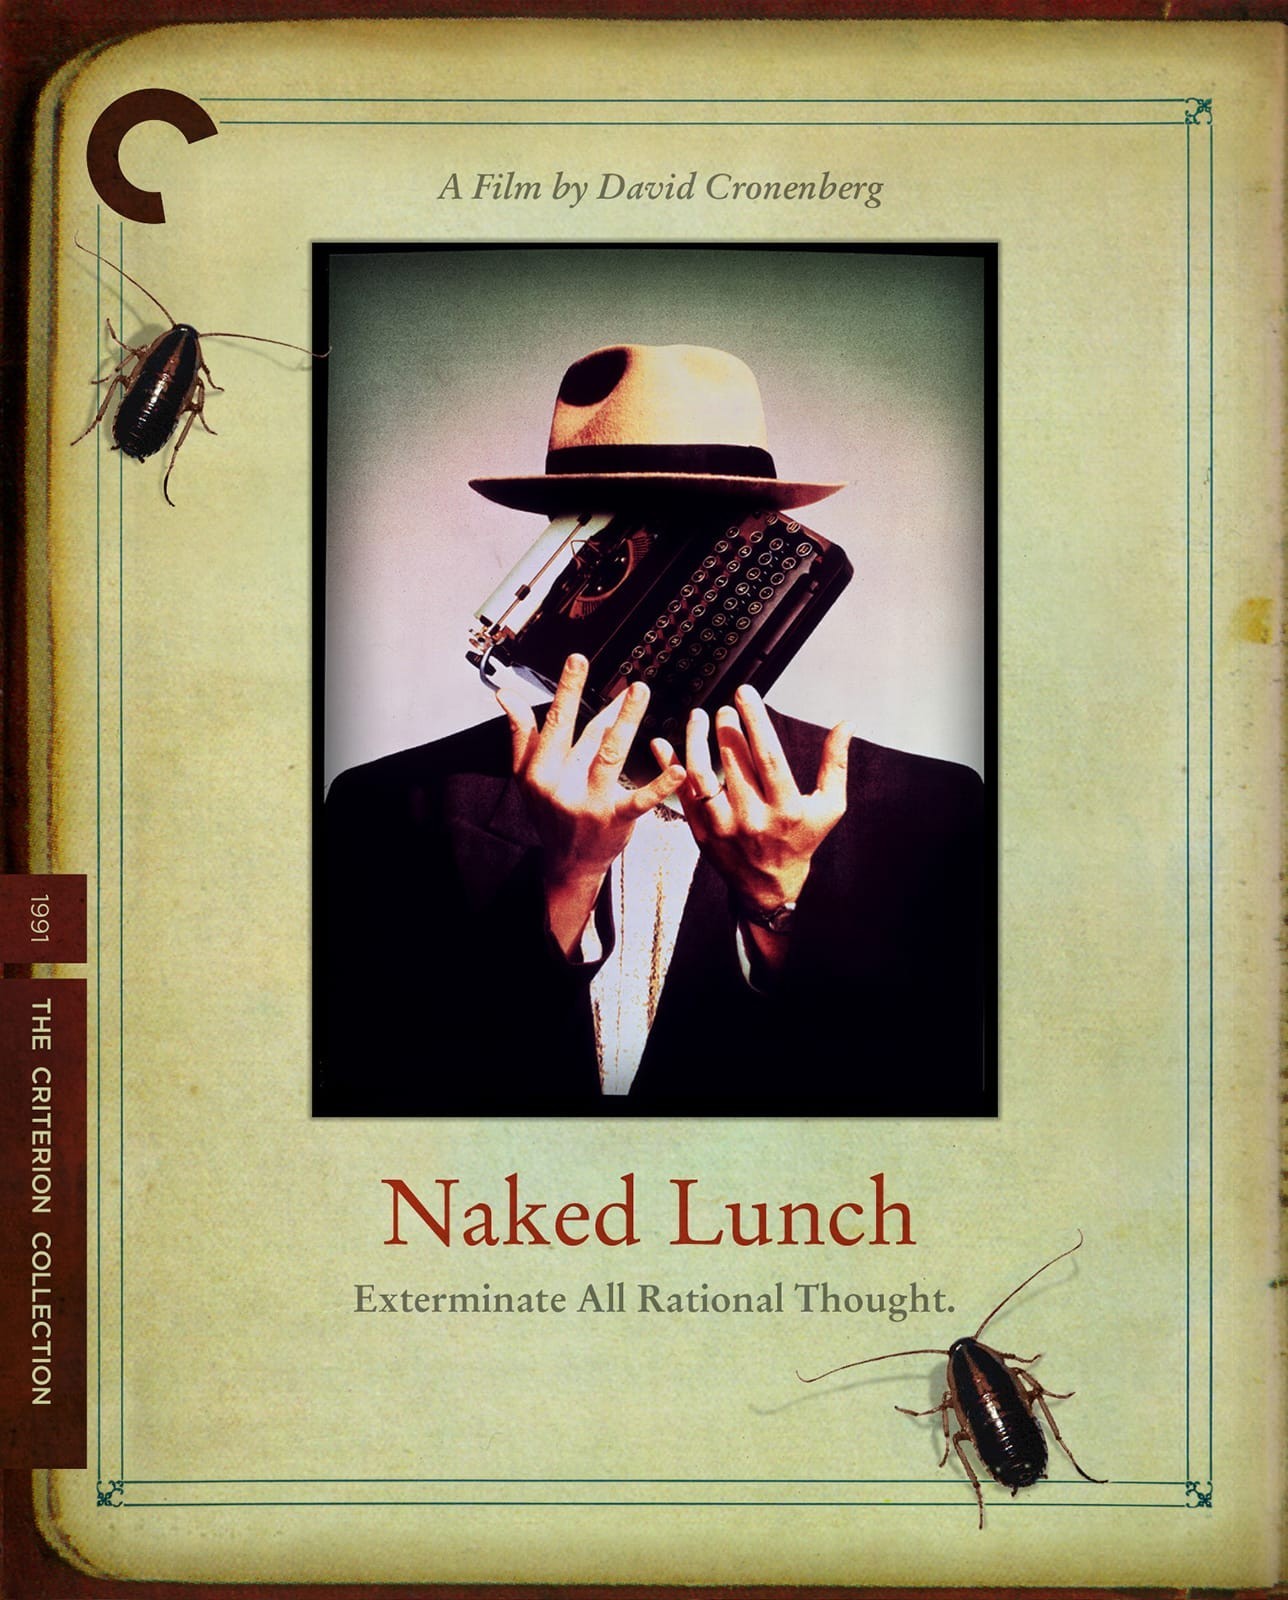 Naked Lunch Blu-ray Release Date December 7, 2011 (Il 